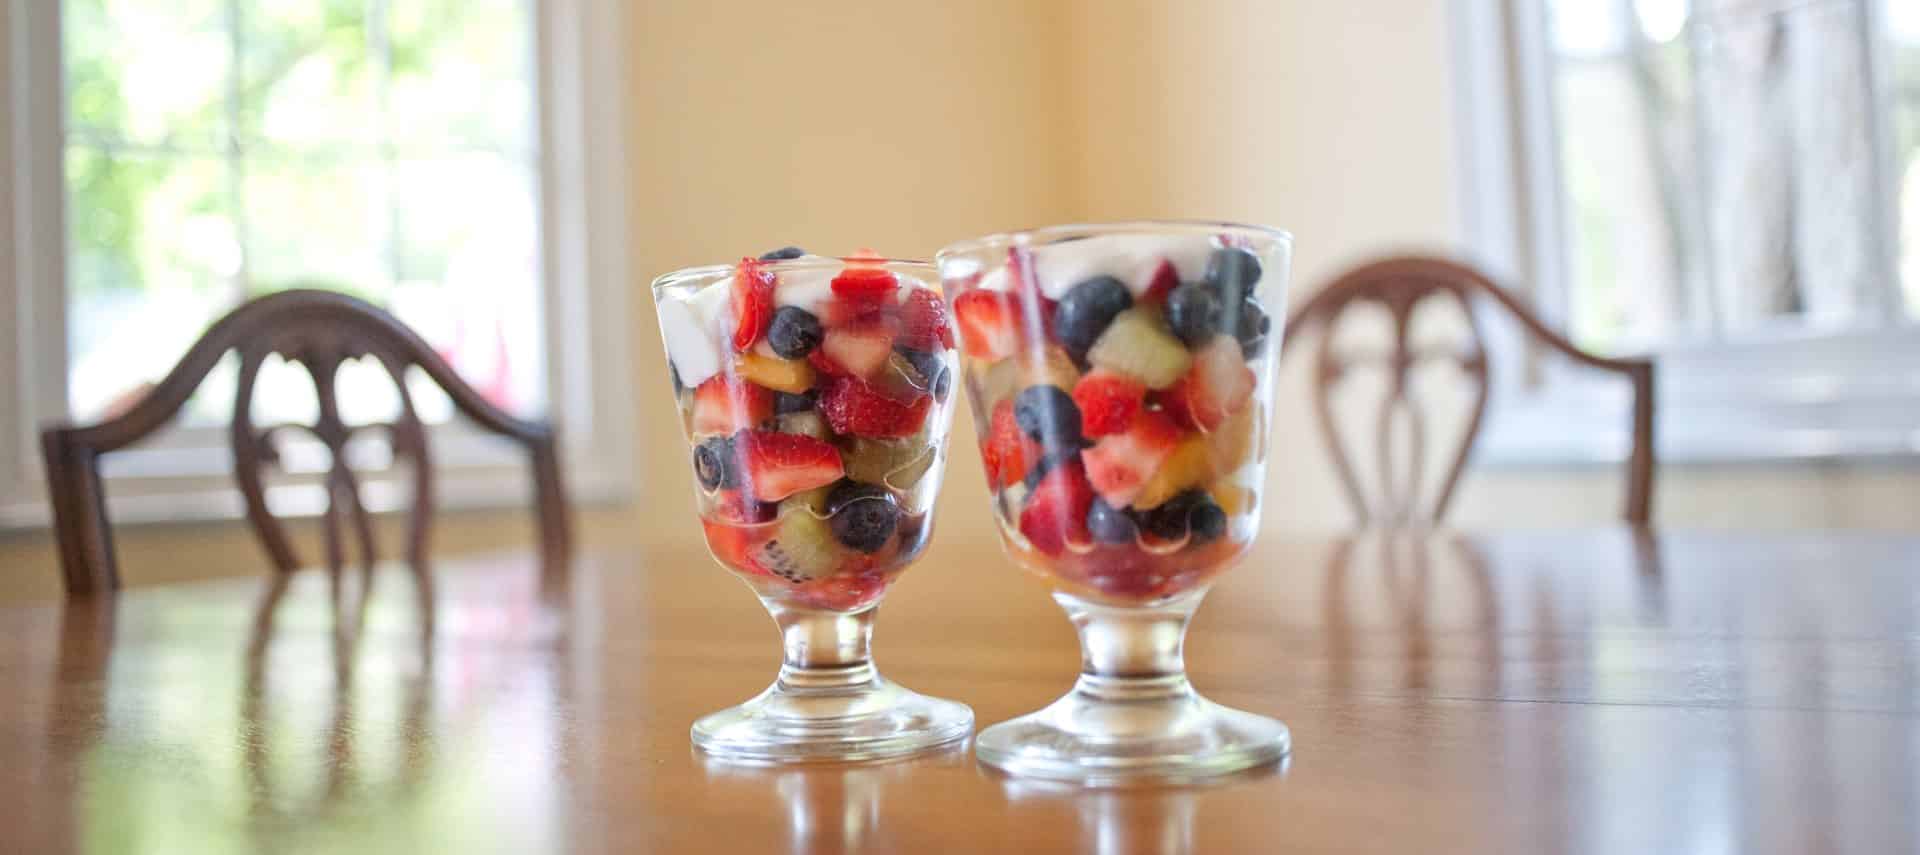 Two fruit parfaits in glass cups on top of wooden table